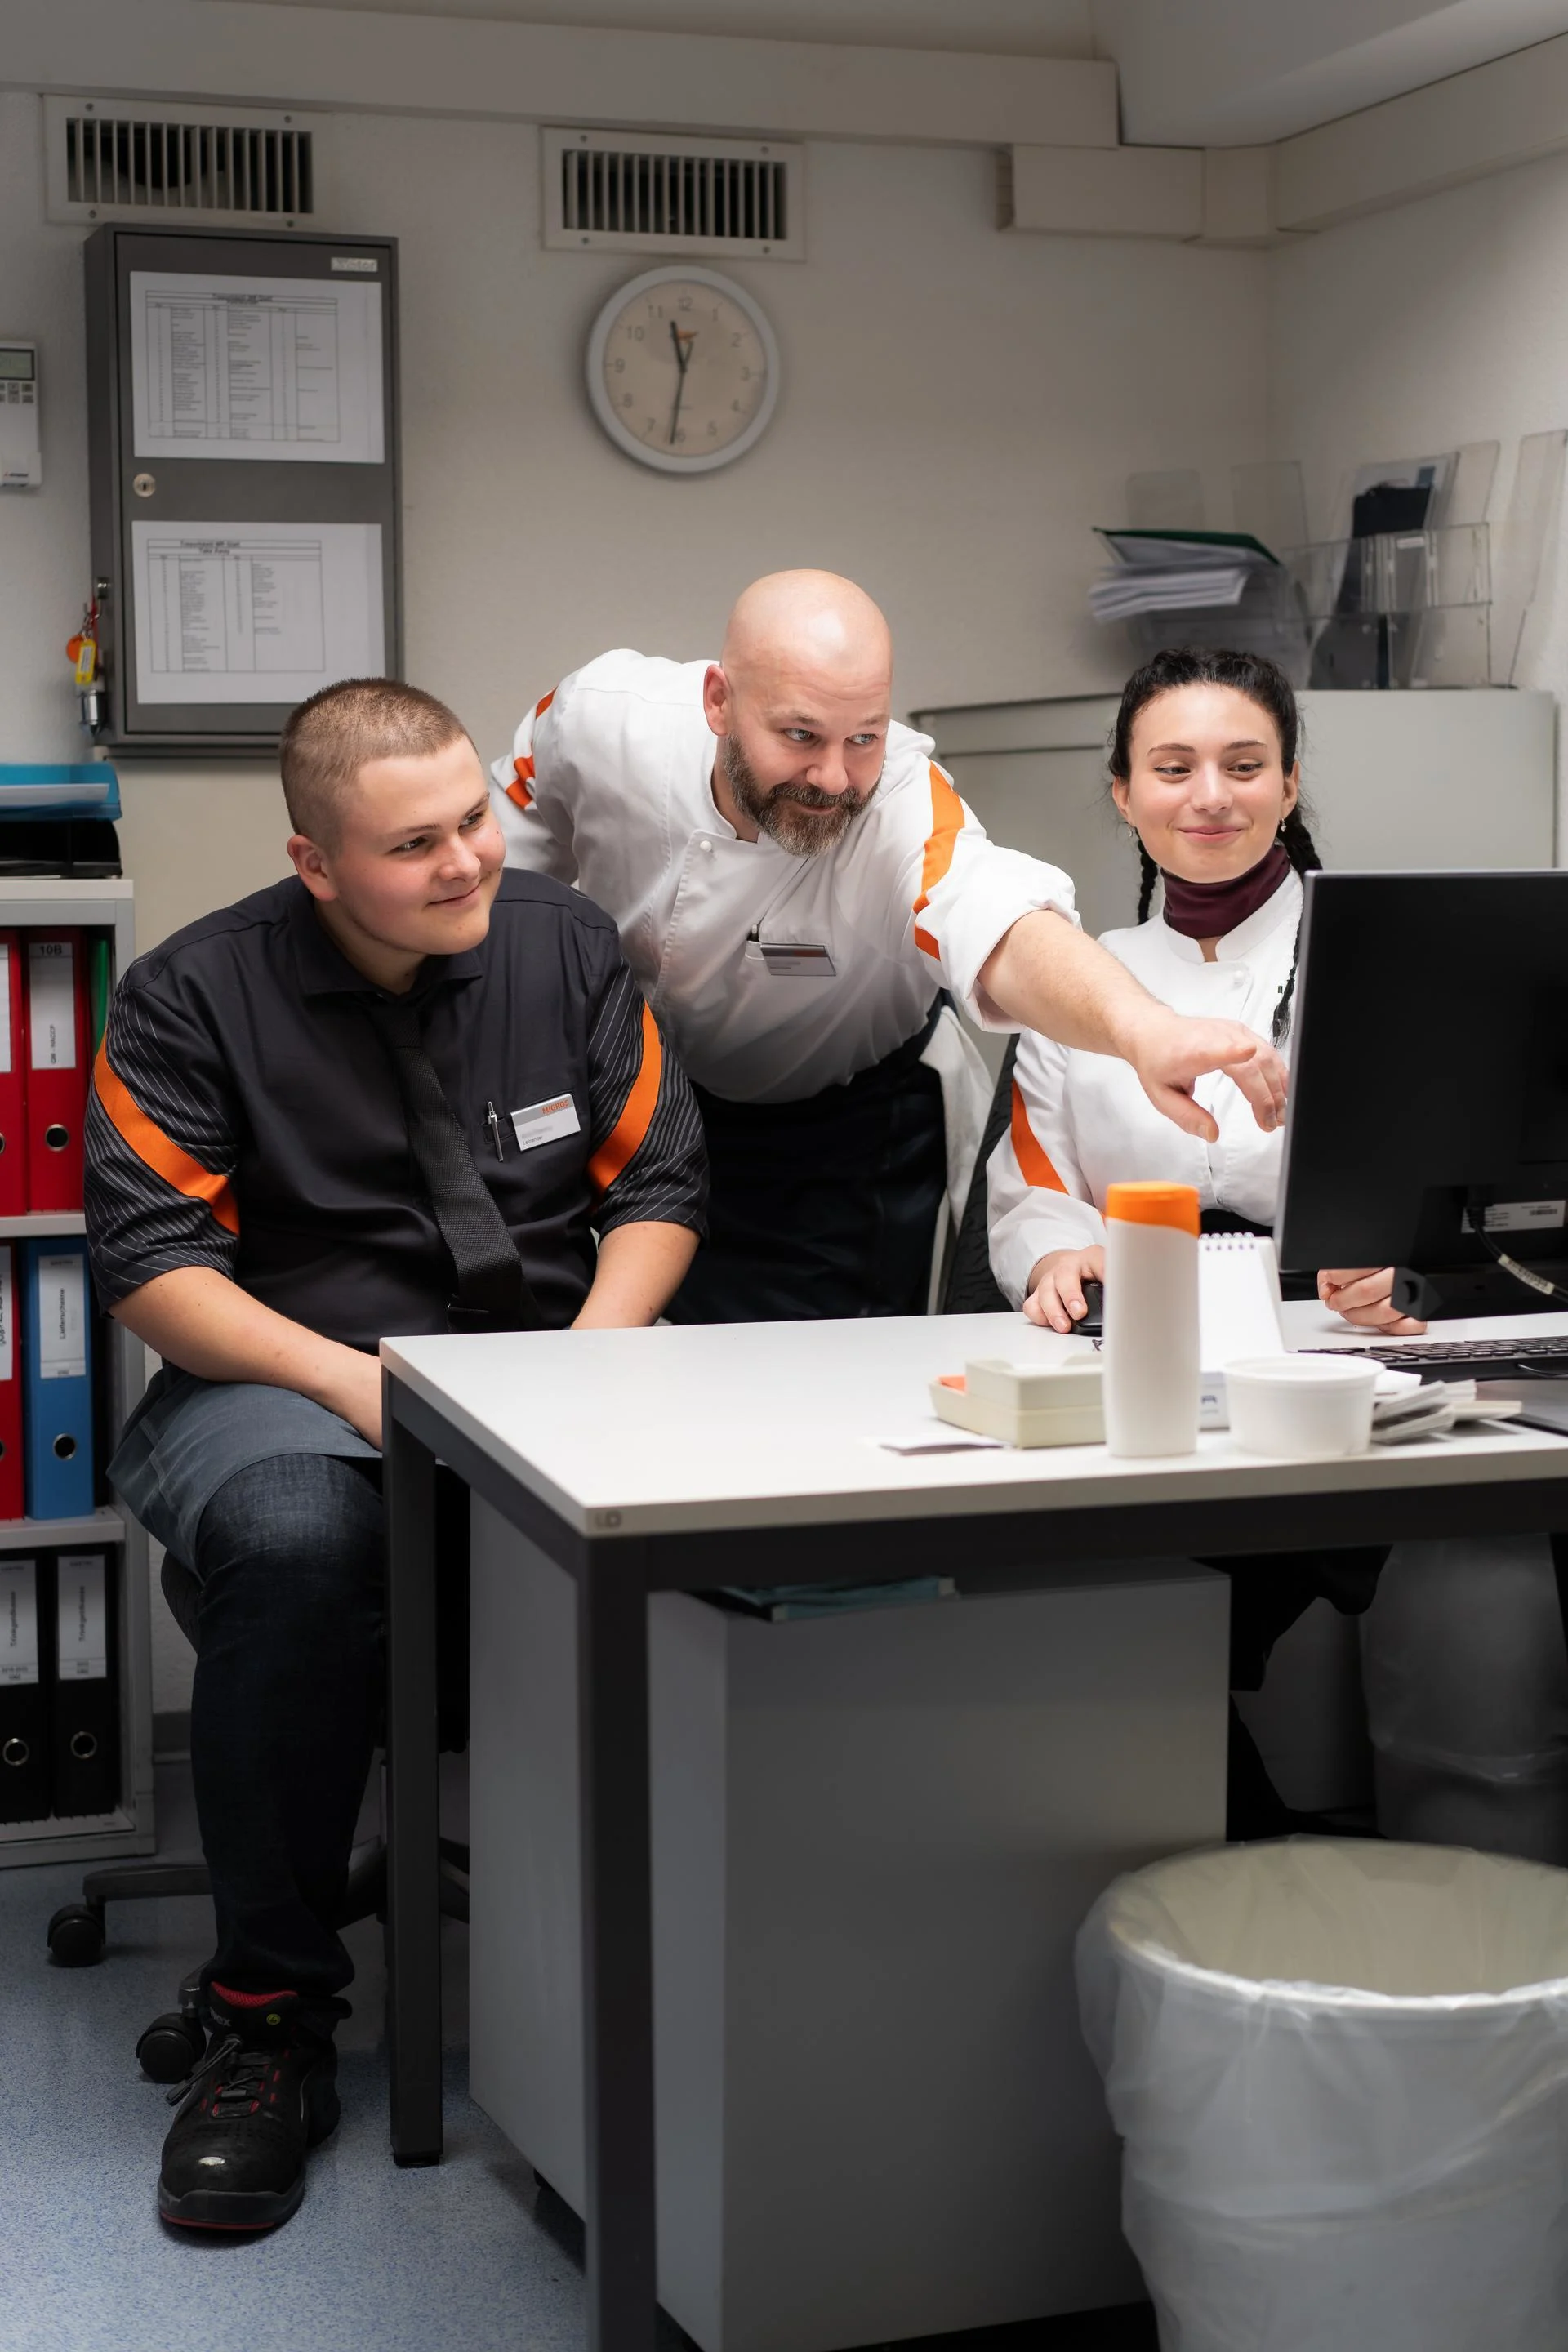 A supervisor explains something to two Migros restaurant apprentices at a desk.